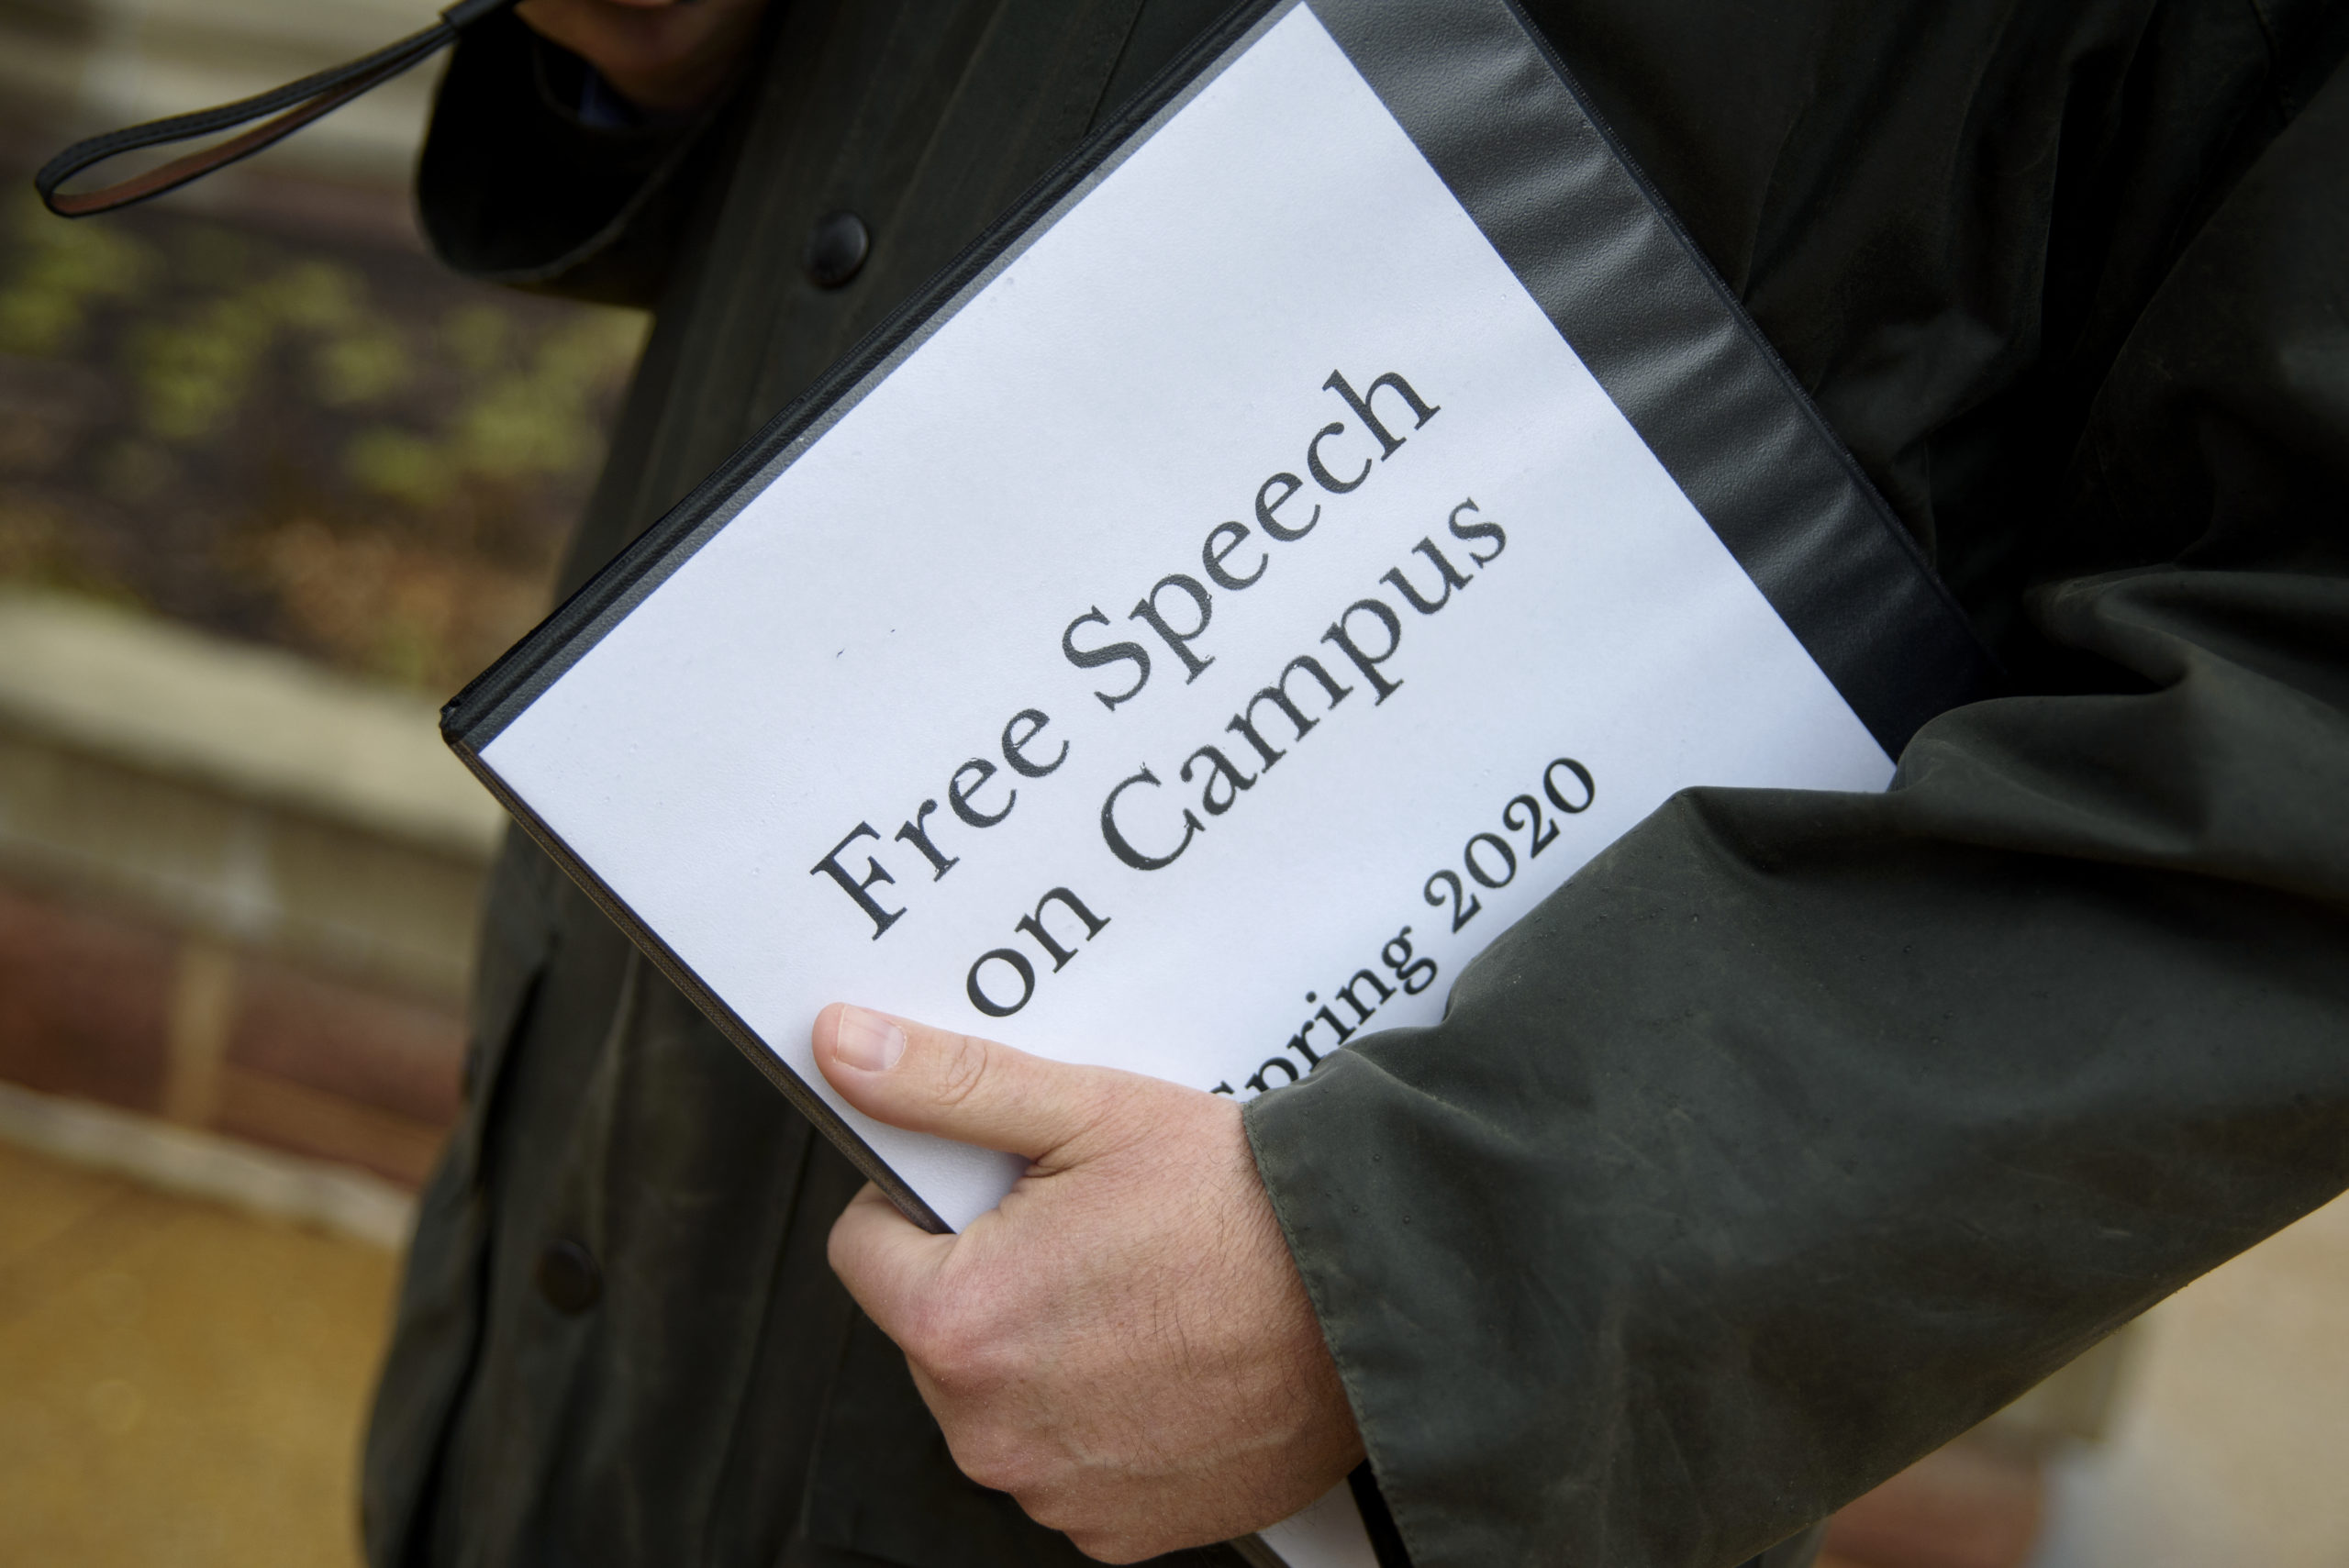 Free Speech First at Texas State University